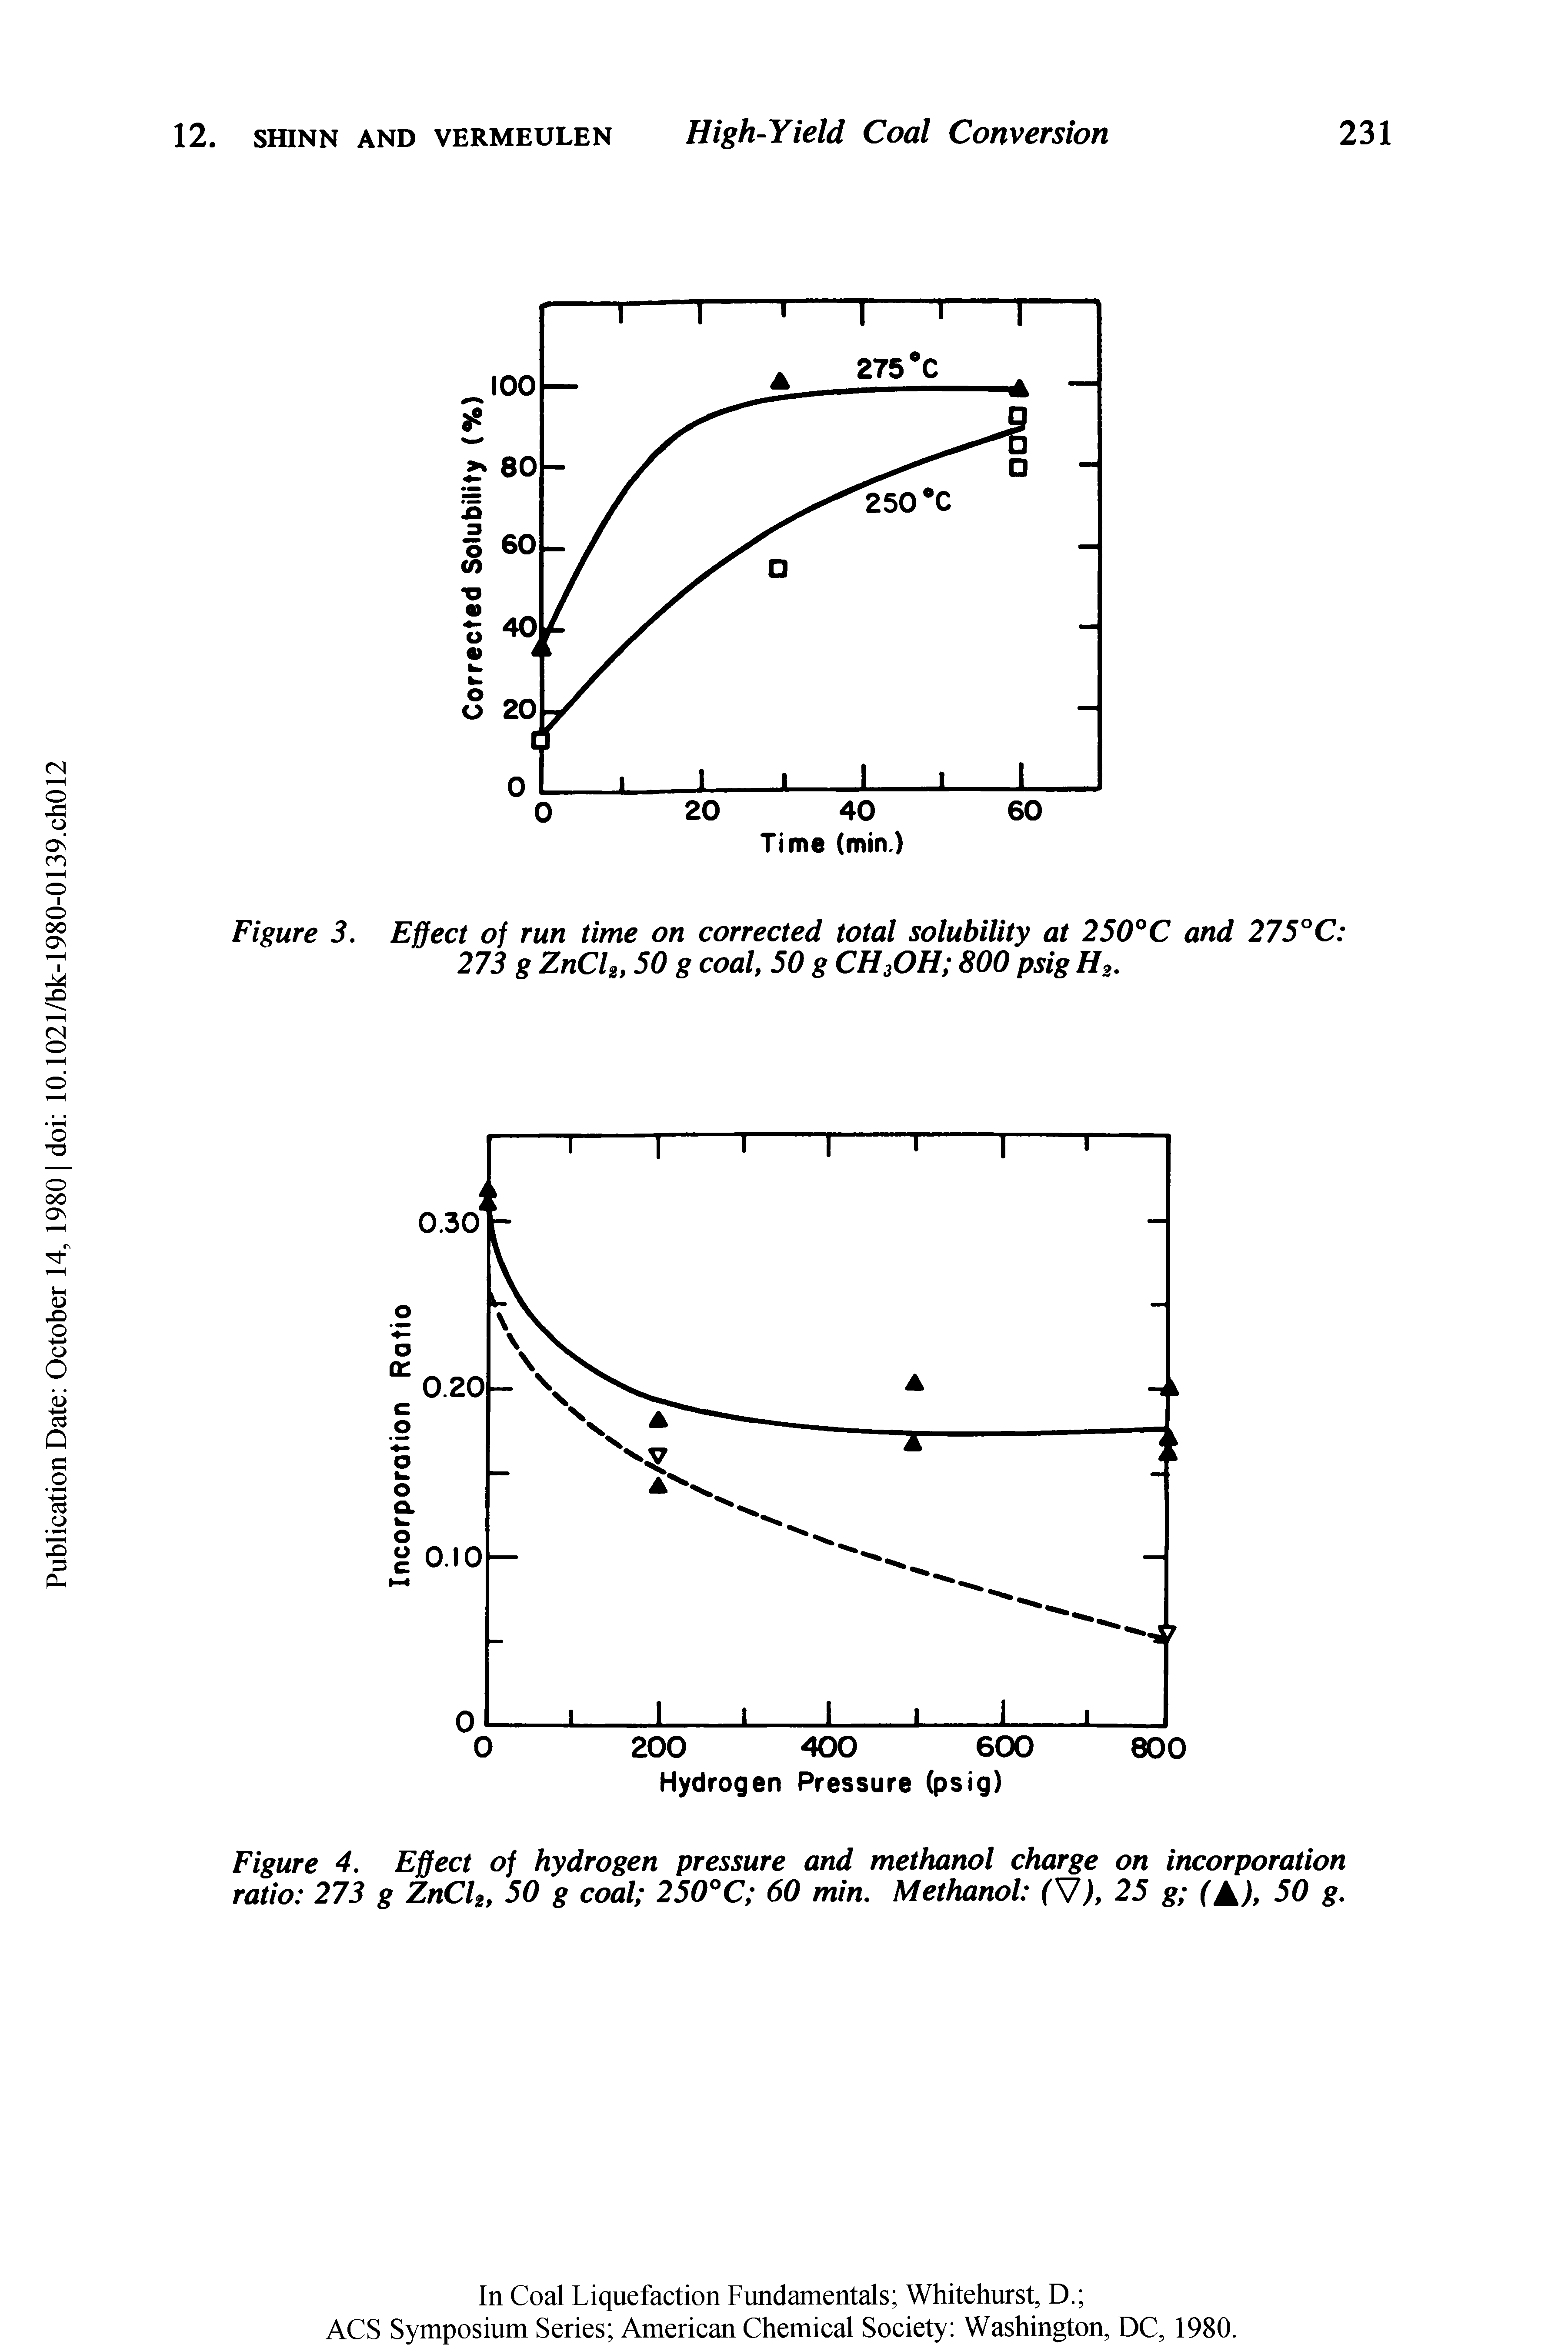 Figure 3. Effect of run time on corrected total solubility at 250°C and 275°C 273 g ZnCl2,50 g coal, 50 g CH3OH 800 psig H2.